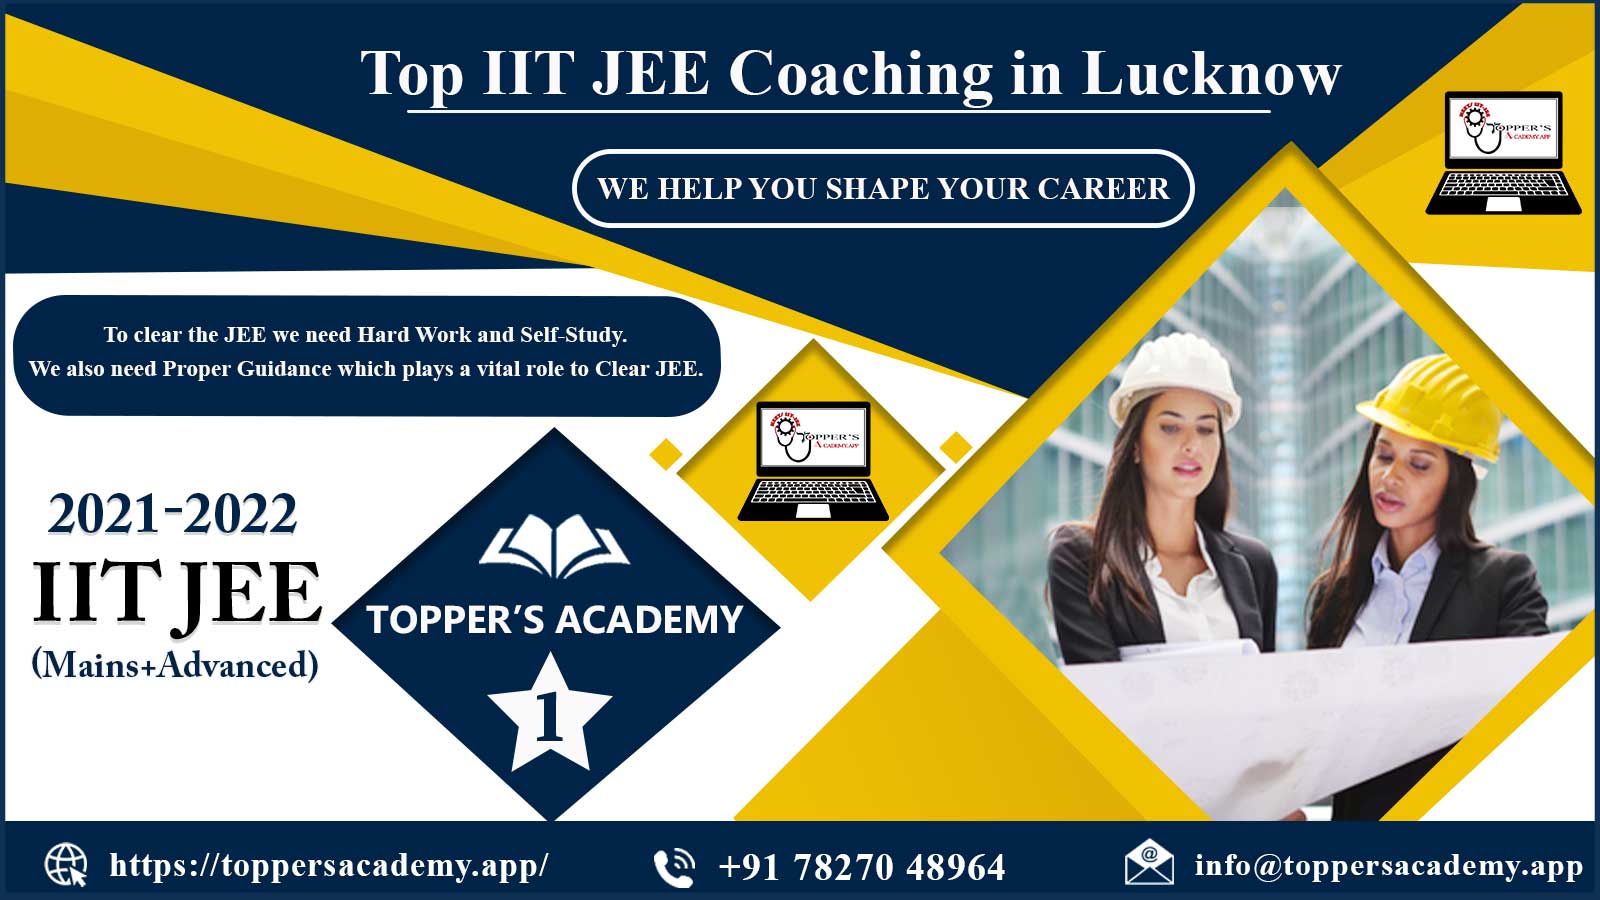 Toppers Academy IIT JEE Coaching in Lucknow